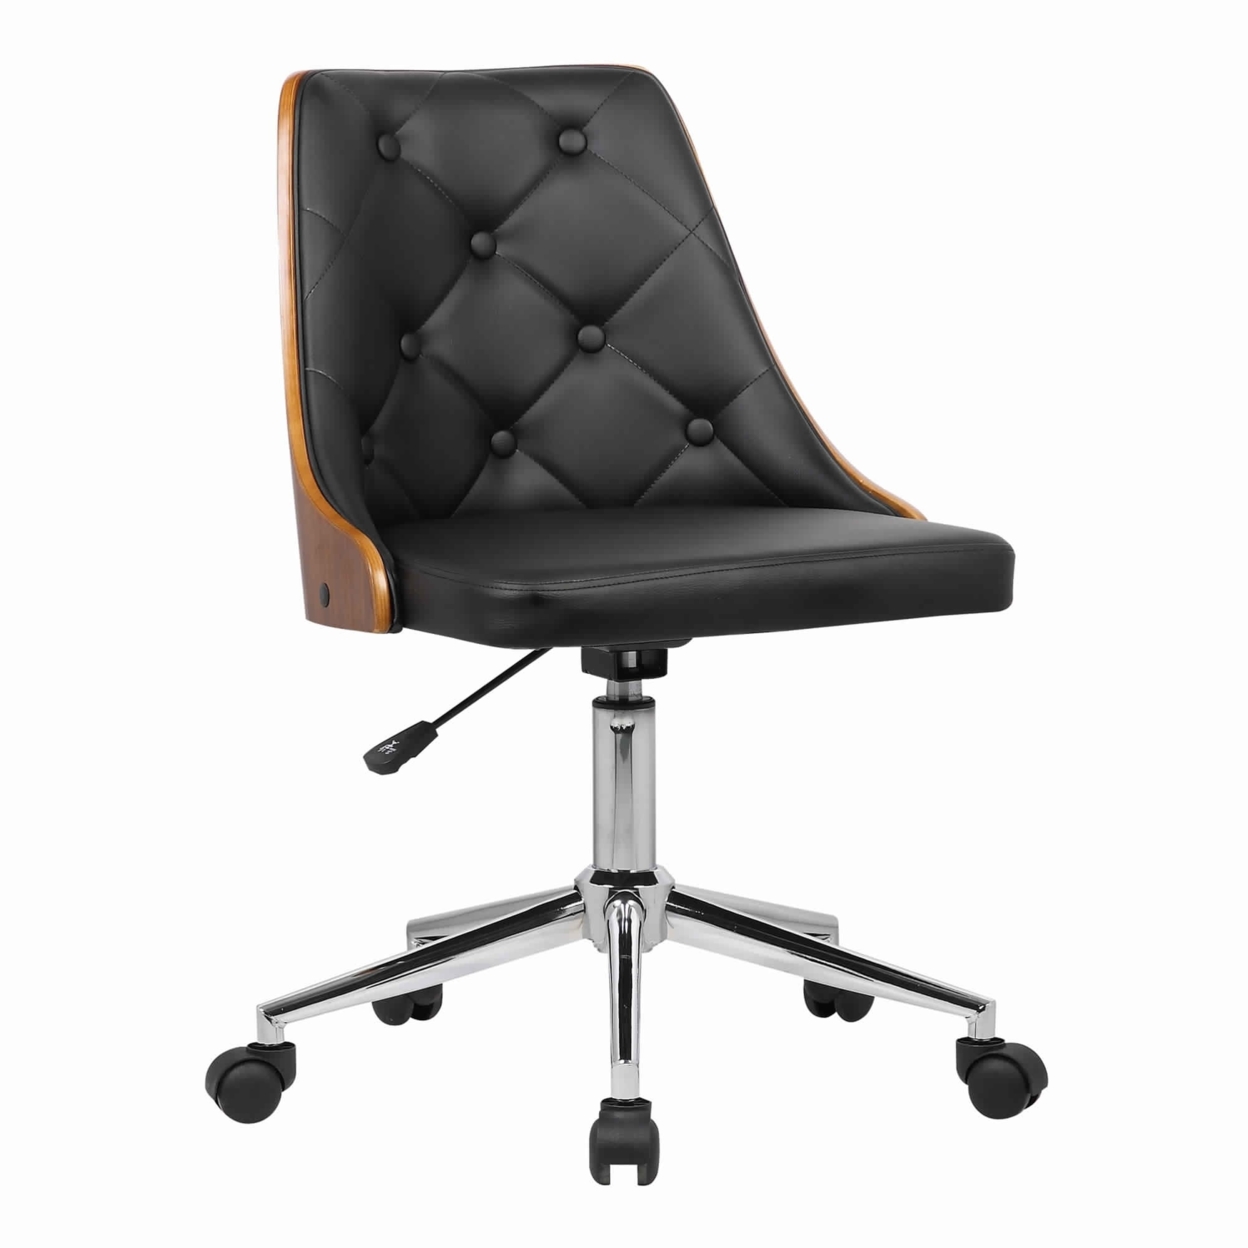 Button Tufted Leatherette Wooden Adjustable Office Chair, Brown And Black- Saltoro Sherpi